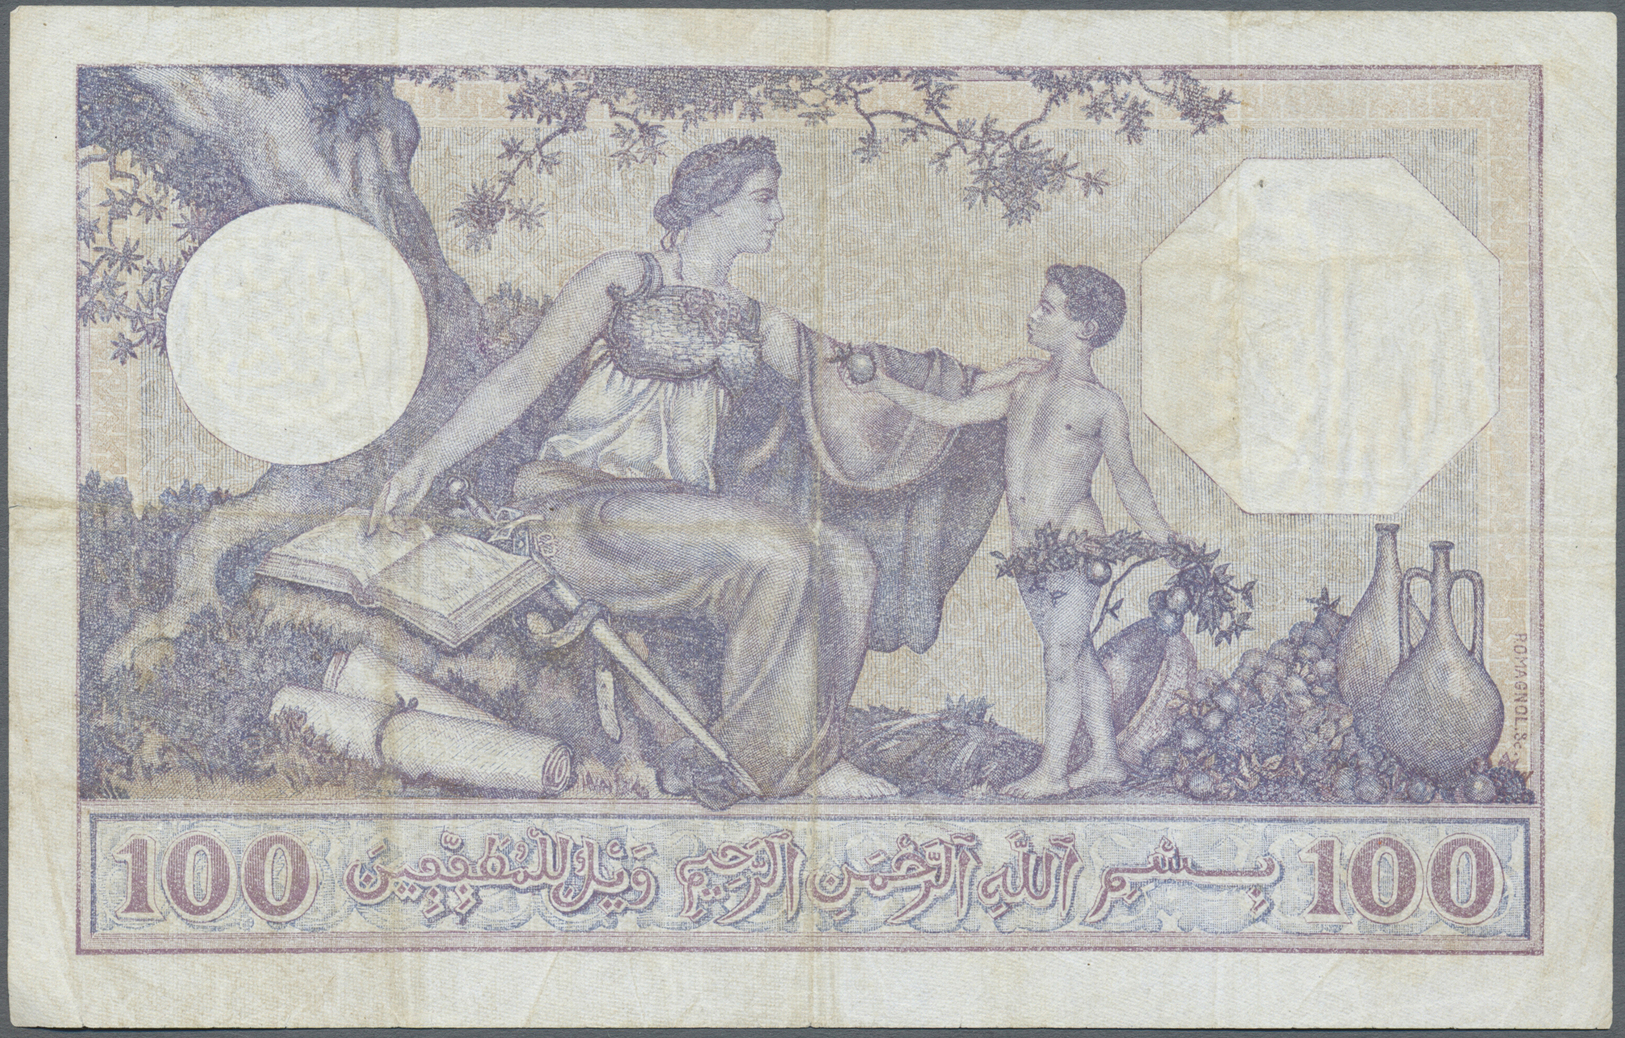 03111 Tunisia / Tunisien: 100 Francs 1933 P. 10b, Used With Folds, Pressed, Very Light Staining, No Holes, No Tears, Sti - Tunisie